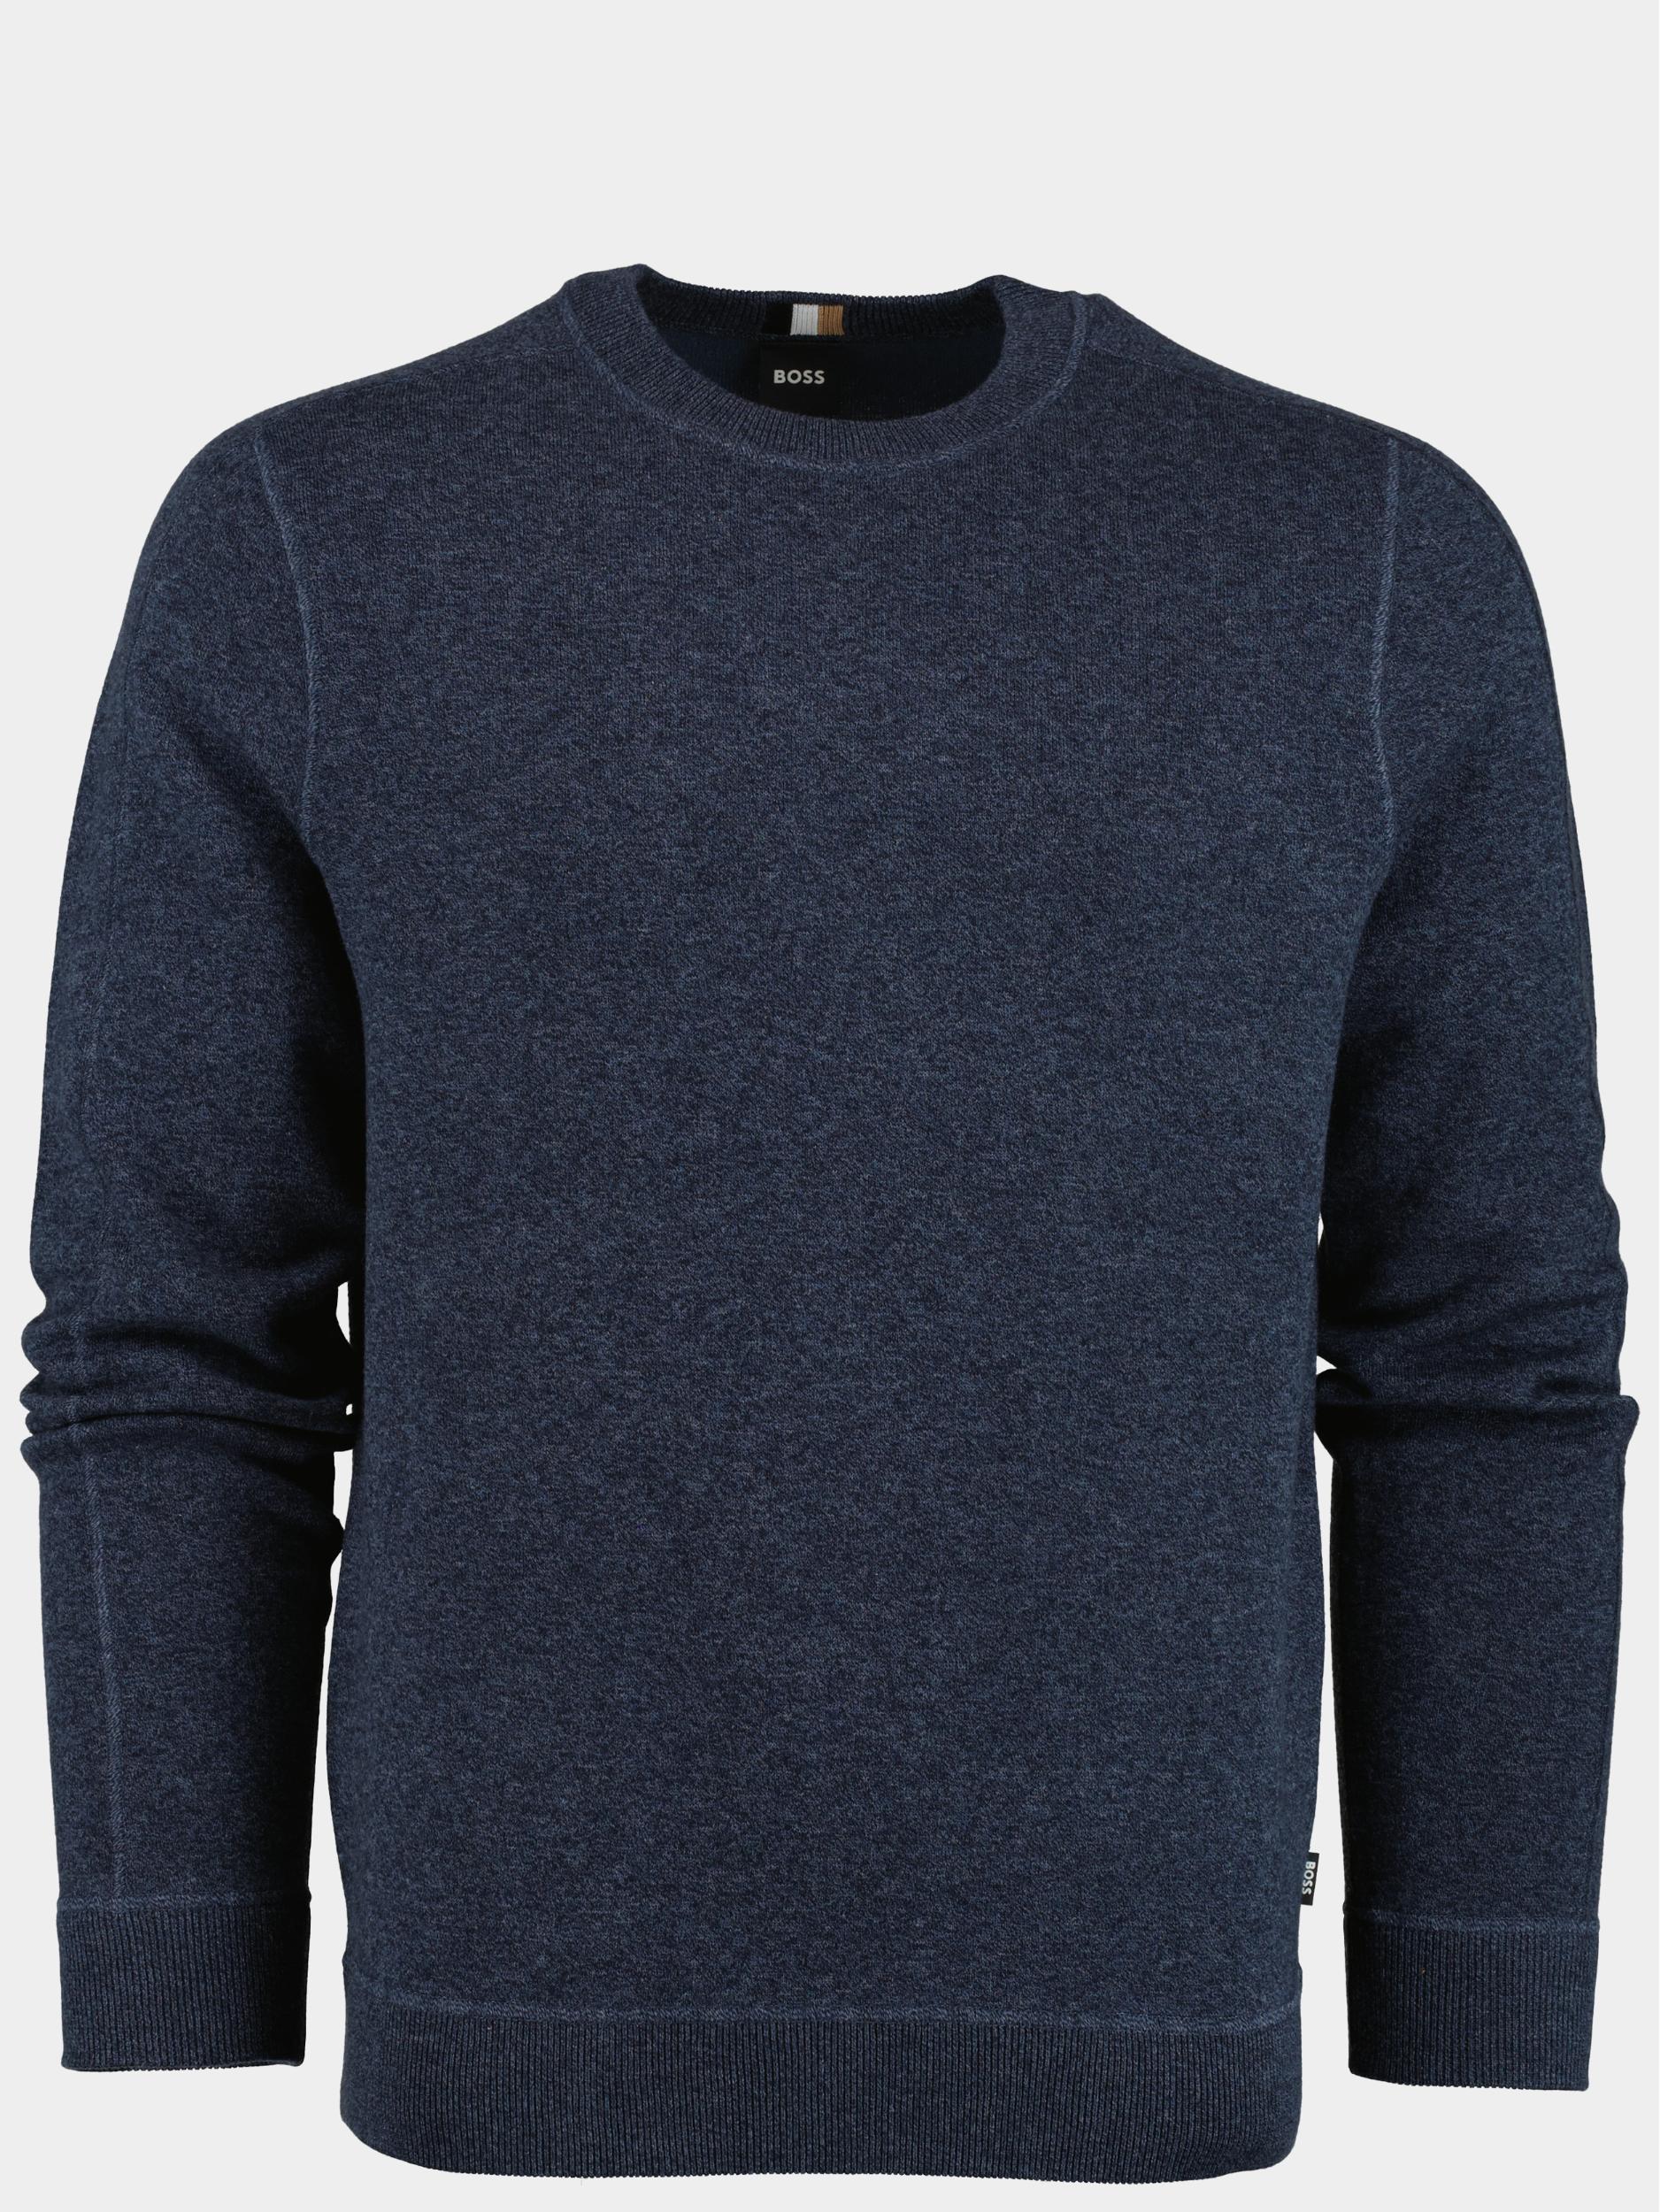 BOSS Black Pullover Blauw Onore 10250913 01 50495402/405